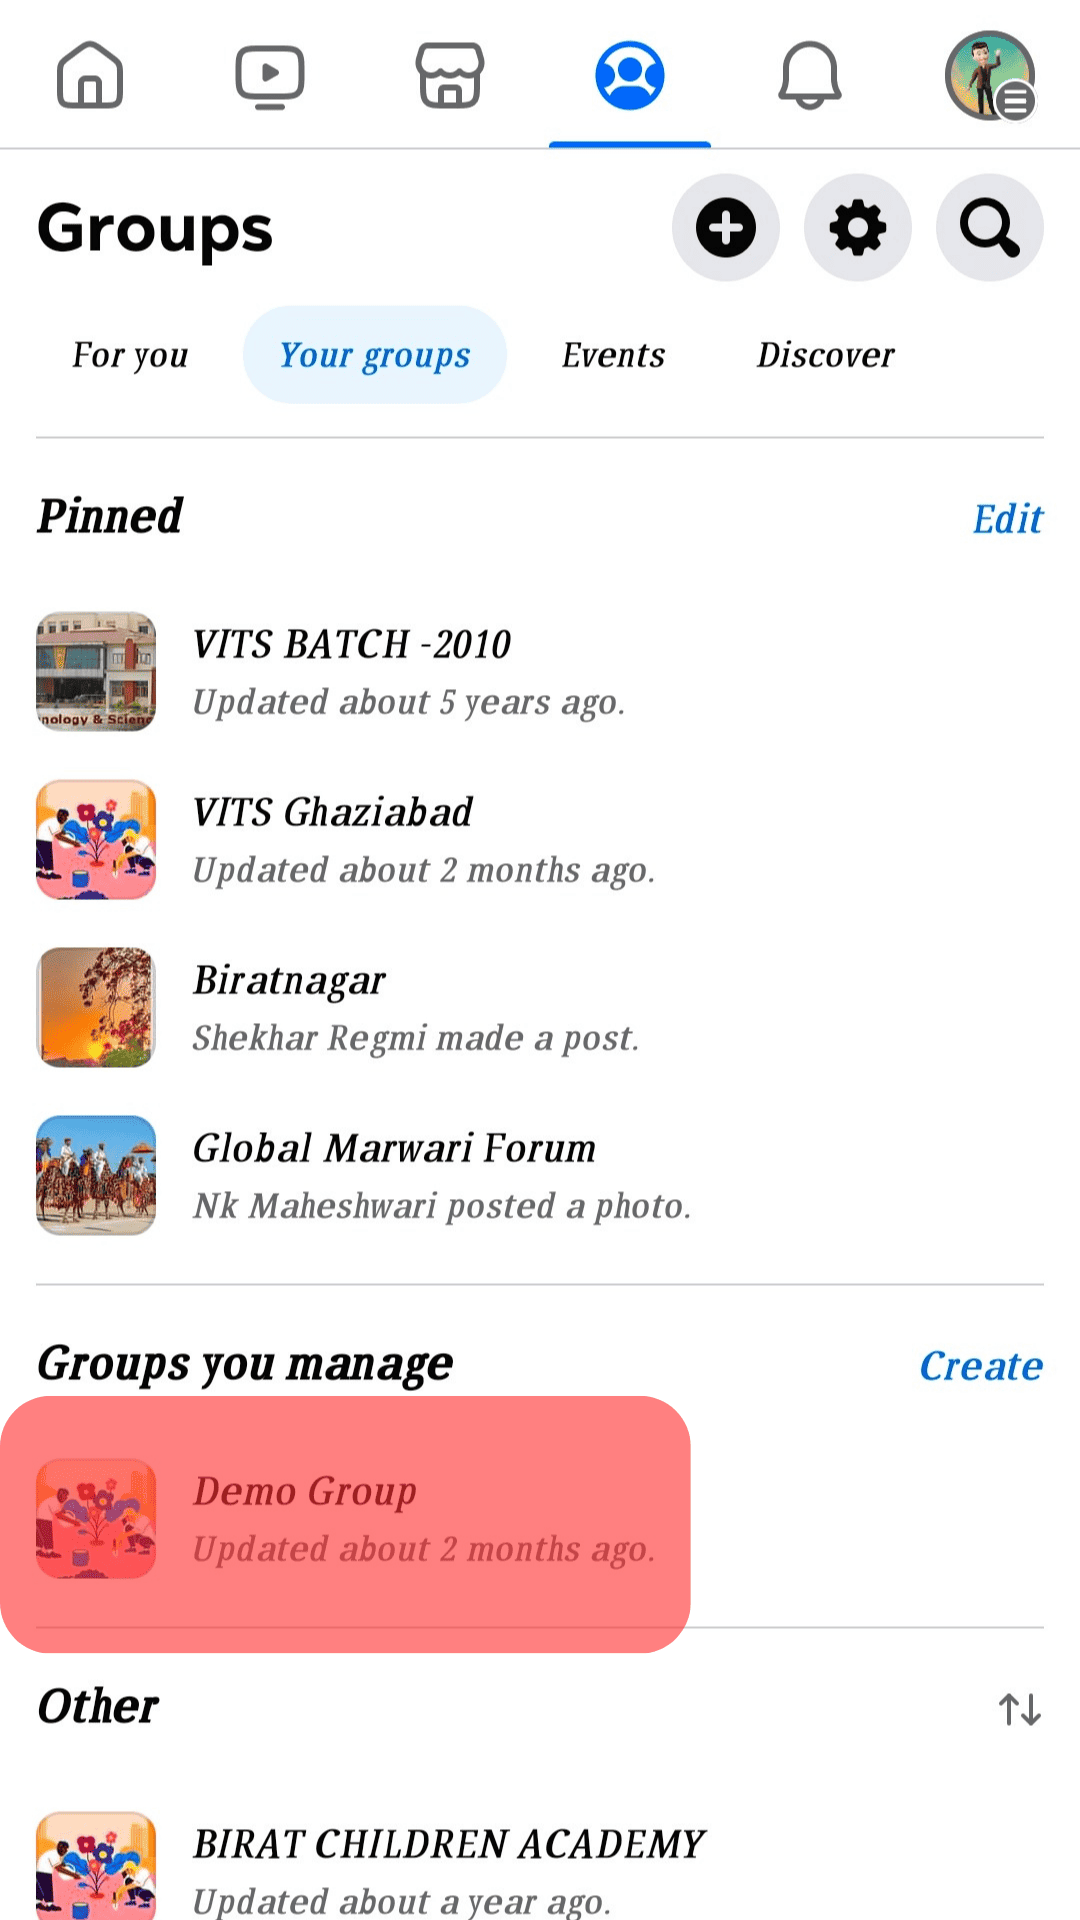 Select The Group You Manage Under Your Groups.